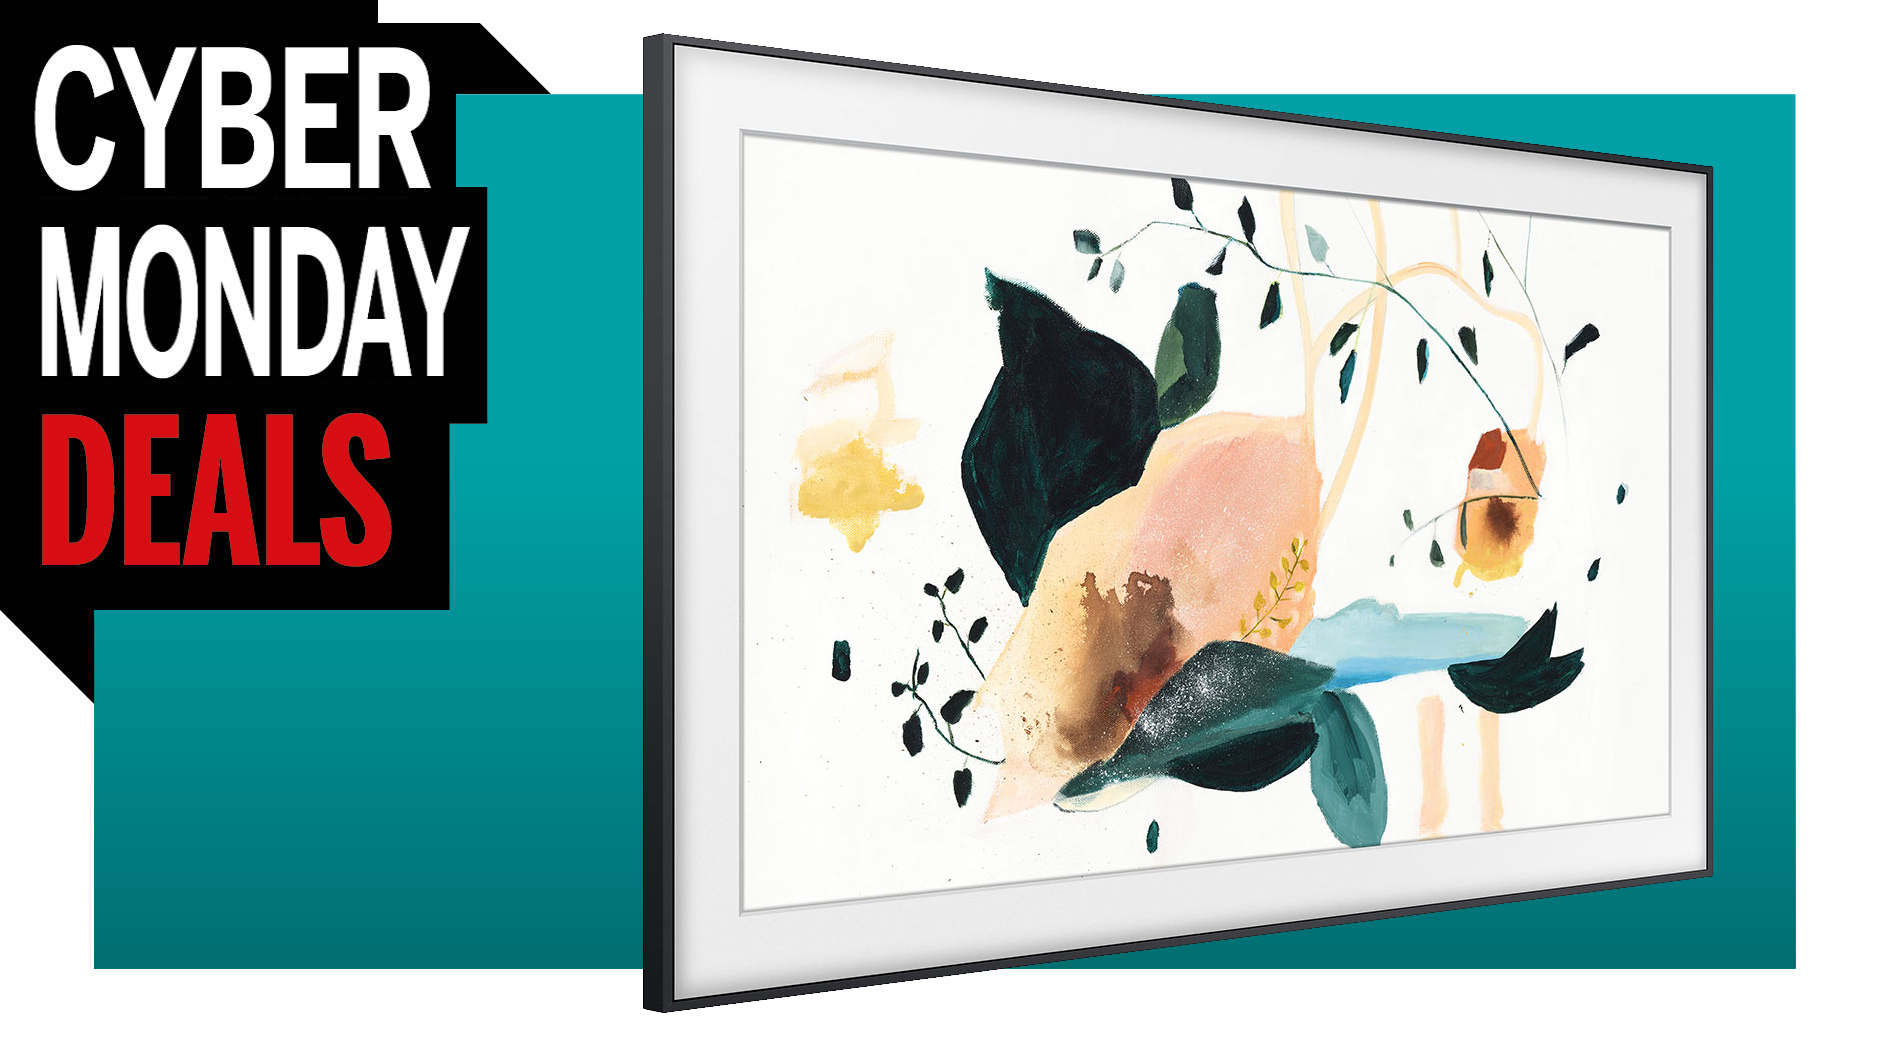  These ultra-chic Samsung 'Frame' TVs are as much as $600 off for Cyber Monday 